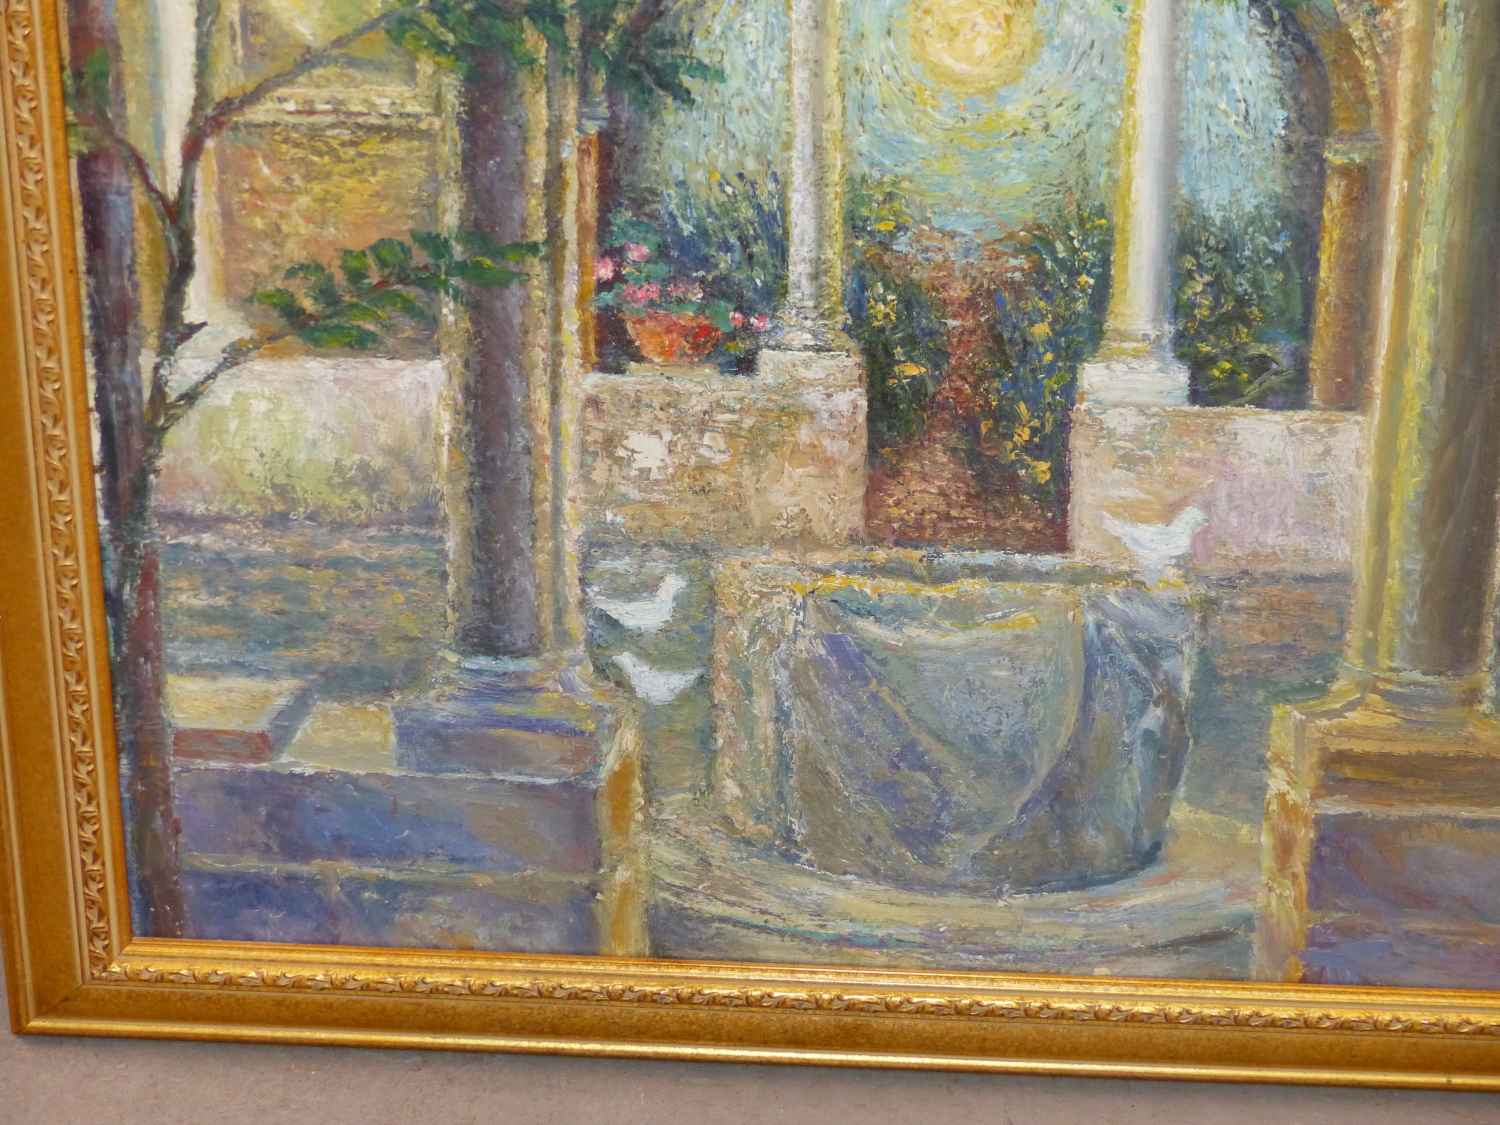 CONTINENTAL SCHOOL (20TH CENTURY), INTERIOR COURTYARD SCENE WITH DOVES AROUND A WELL, IMPASTO OIL, - Image 4 of 6